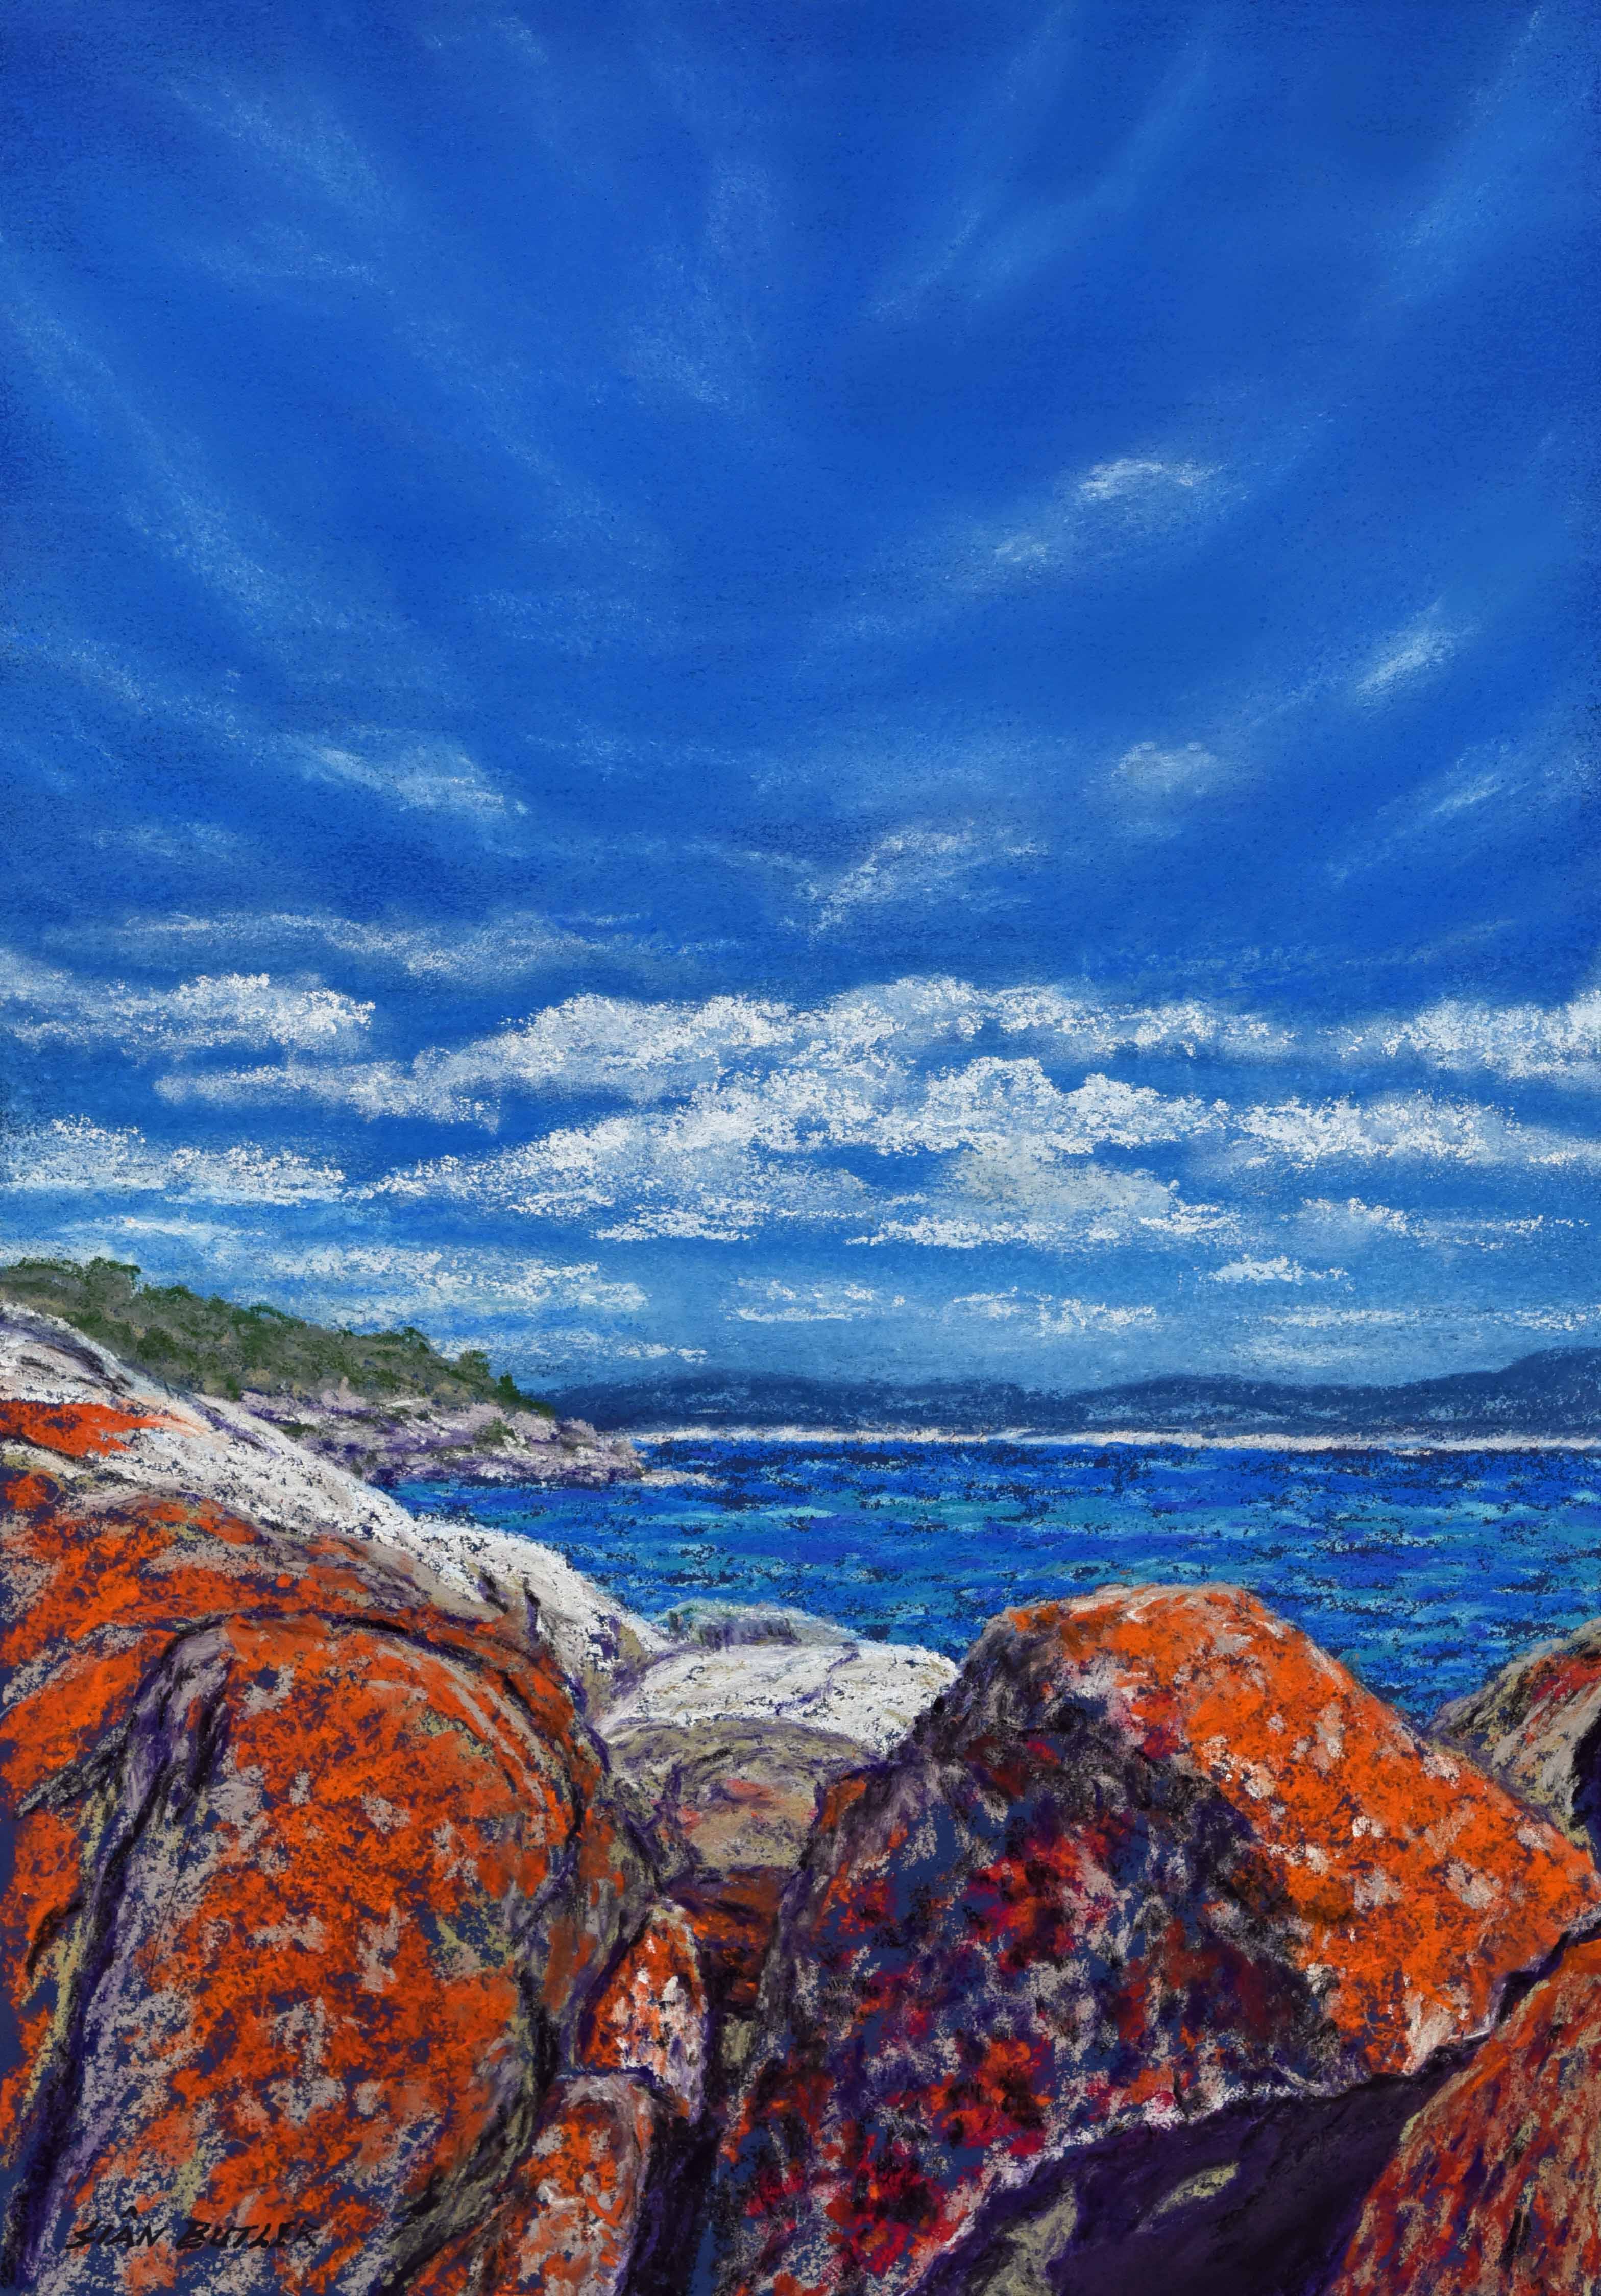 Australian Seascape Paintings 1 | Tracts4free